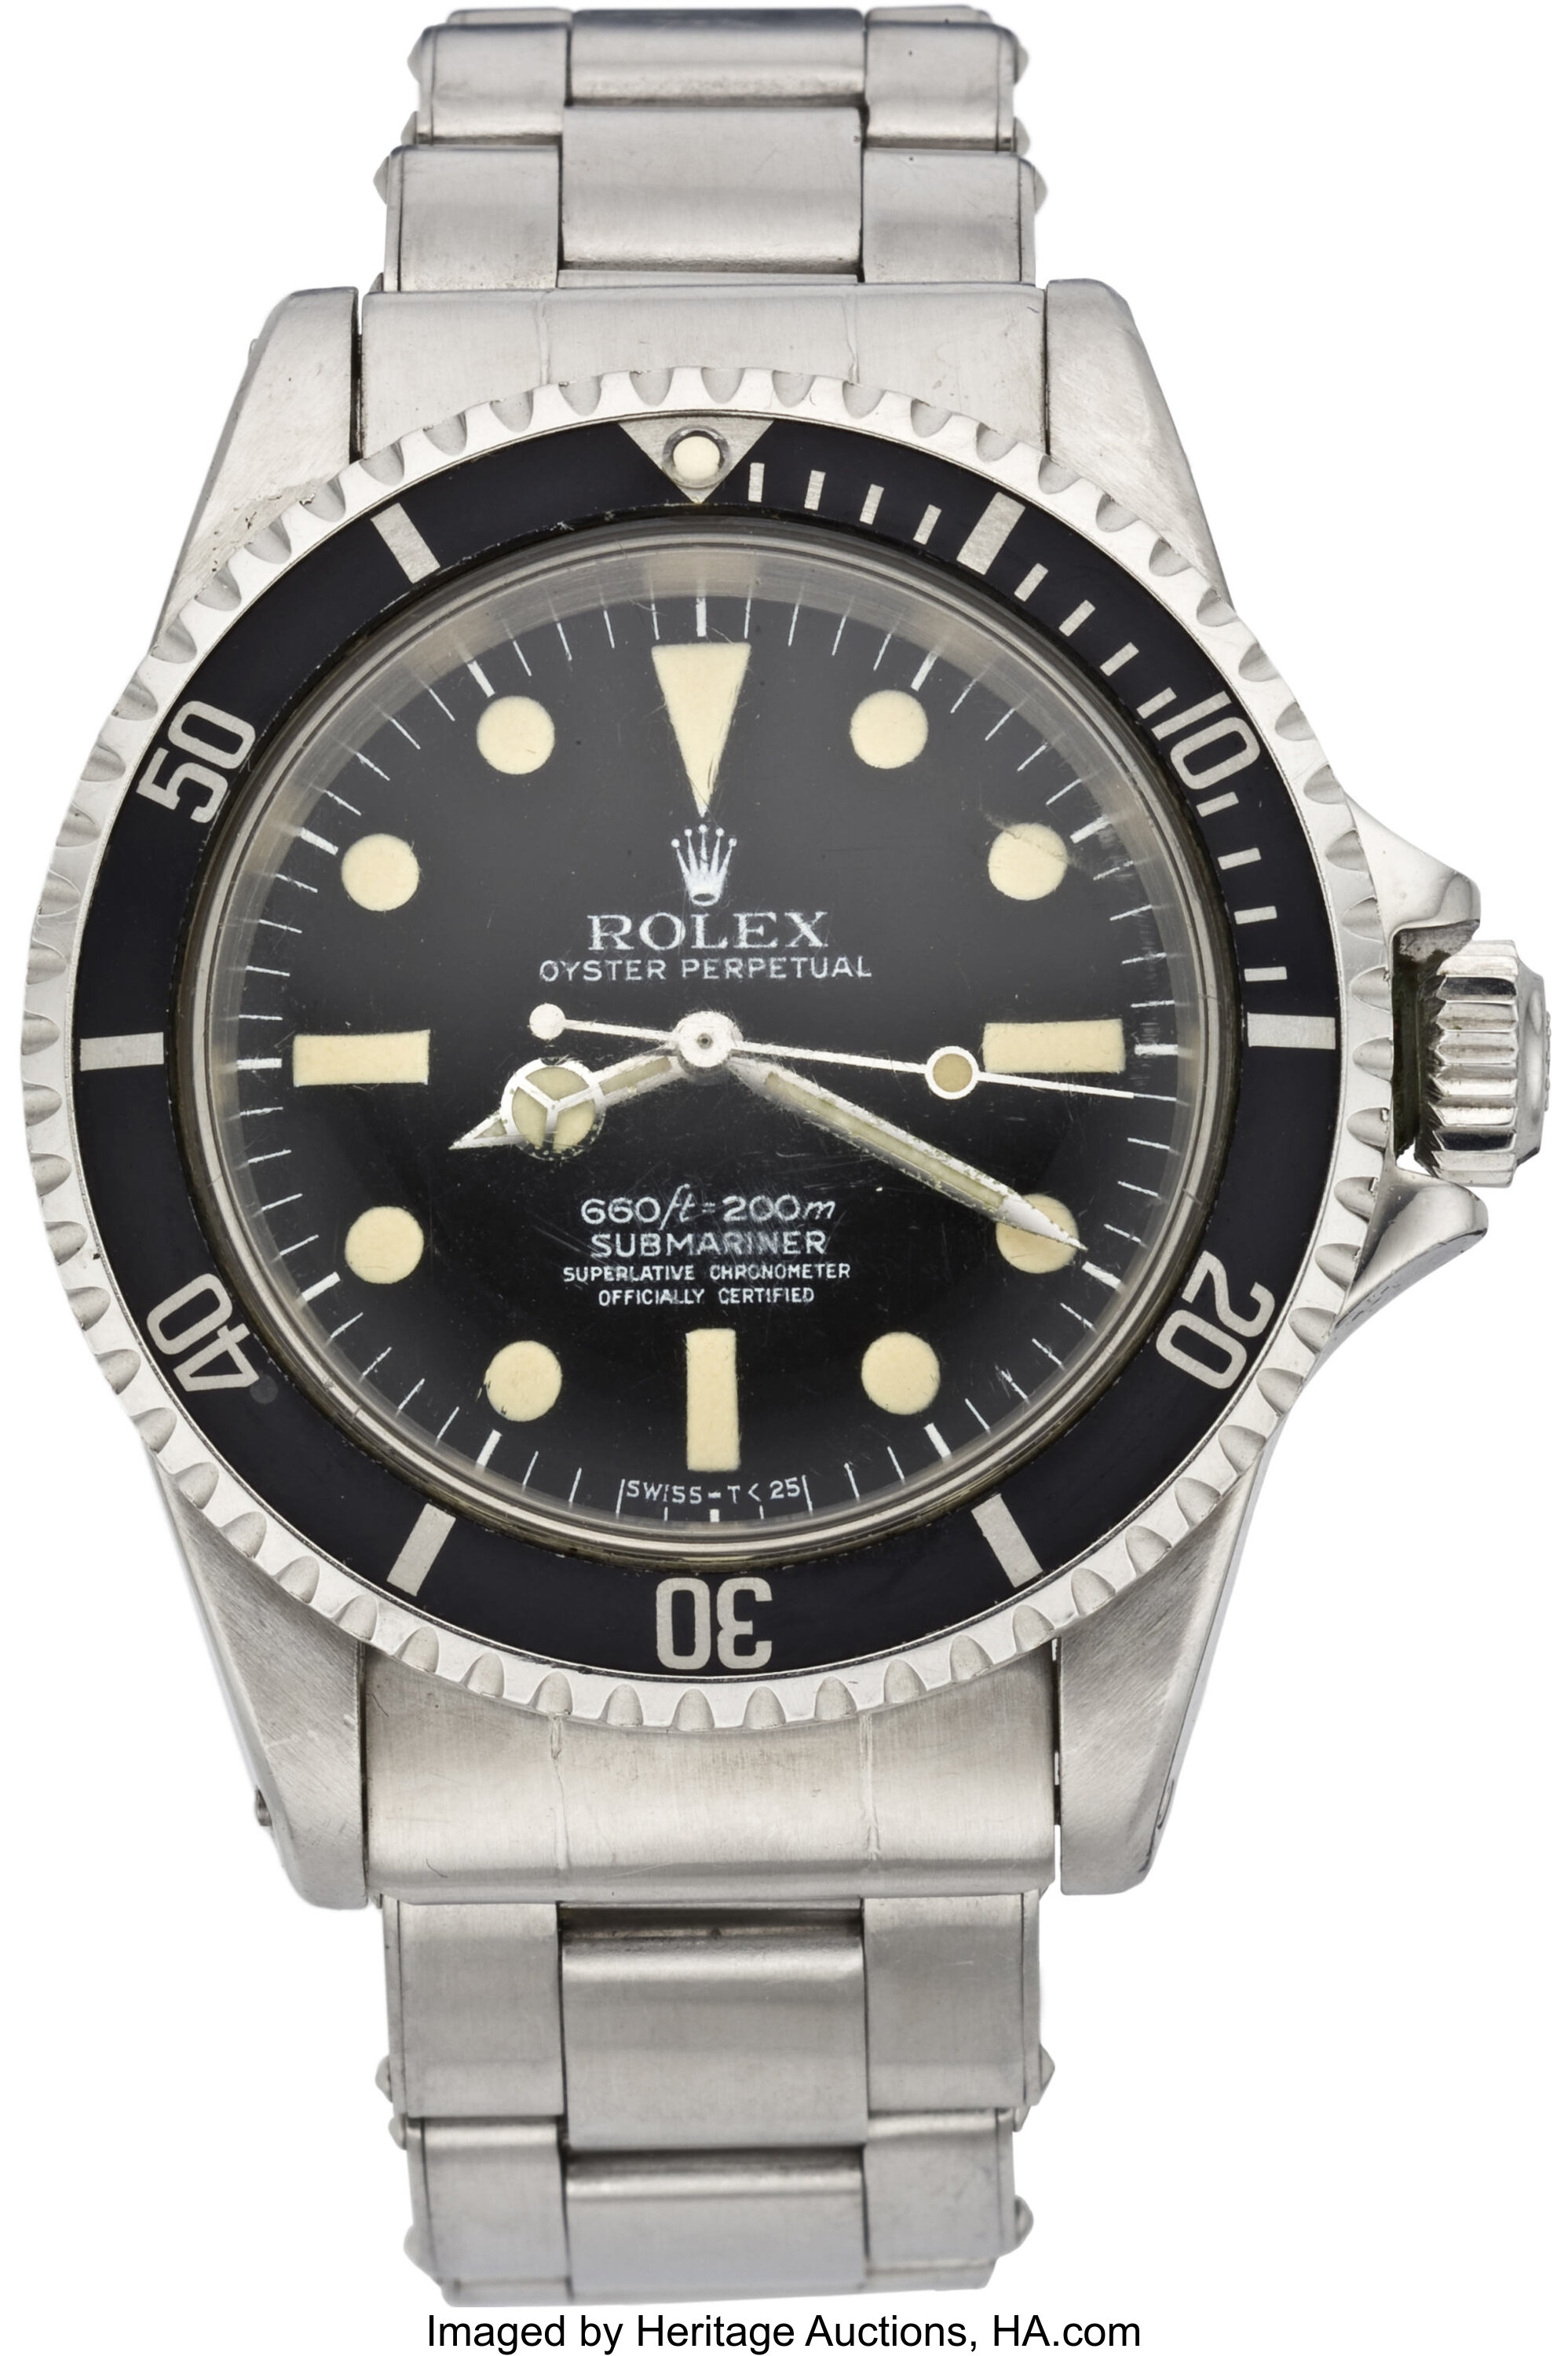 Rolex Submariner Ref. 5513, Four Line "Feet First" Dial, Dome Lot #59594 | Heritage Auctions